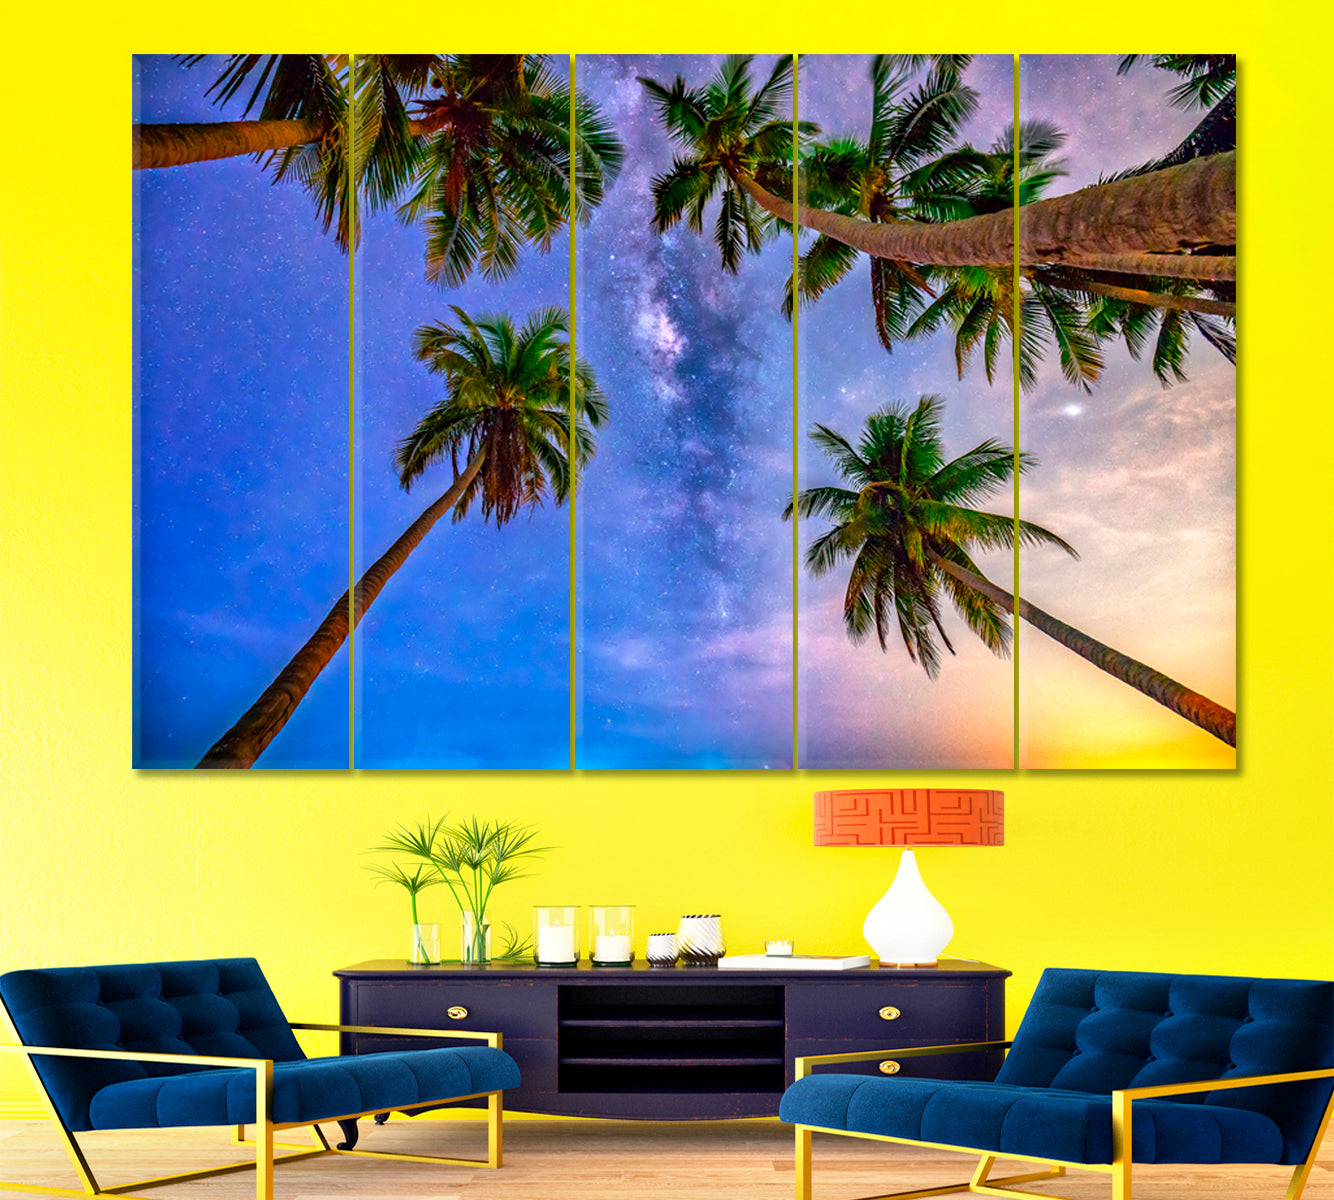 Coconut Palms Trees Milky Way Sky on a beautiful Summer Night Landscape Tropical, Exotic Art Print Artesty   